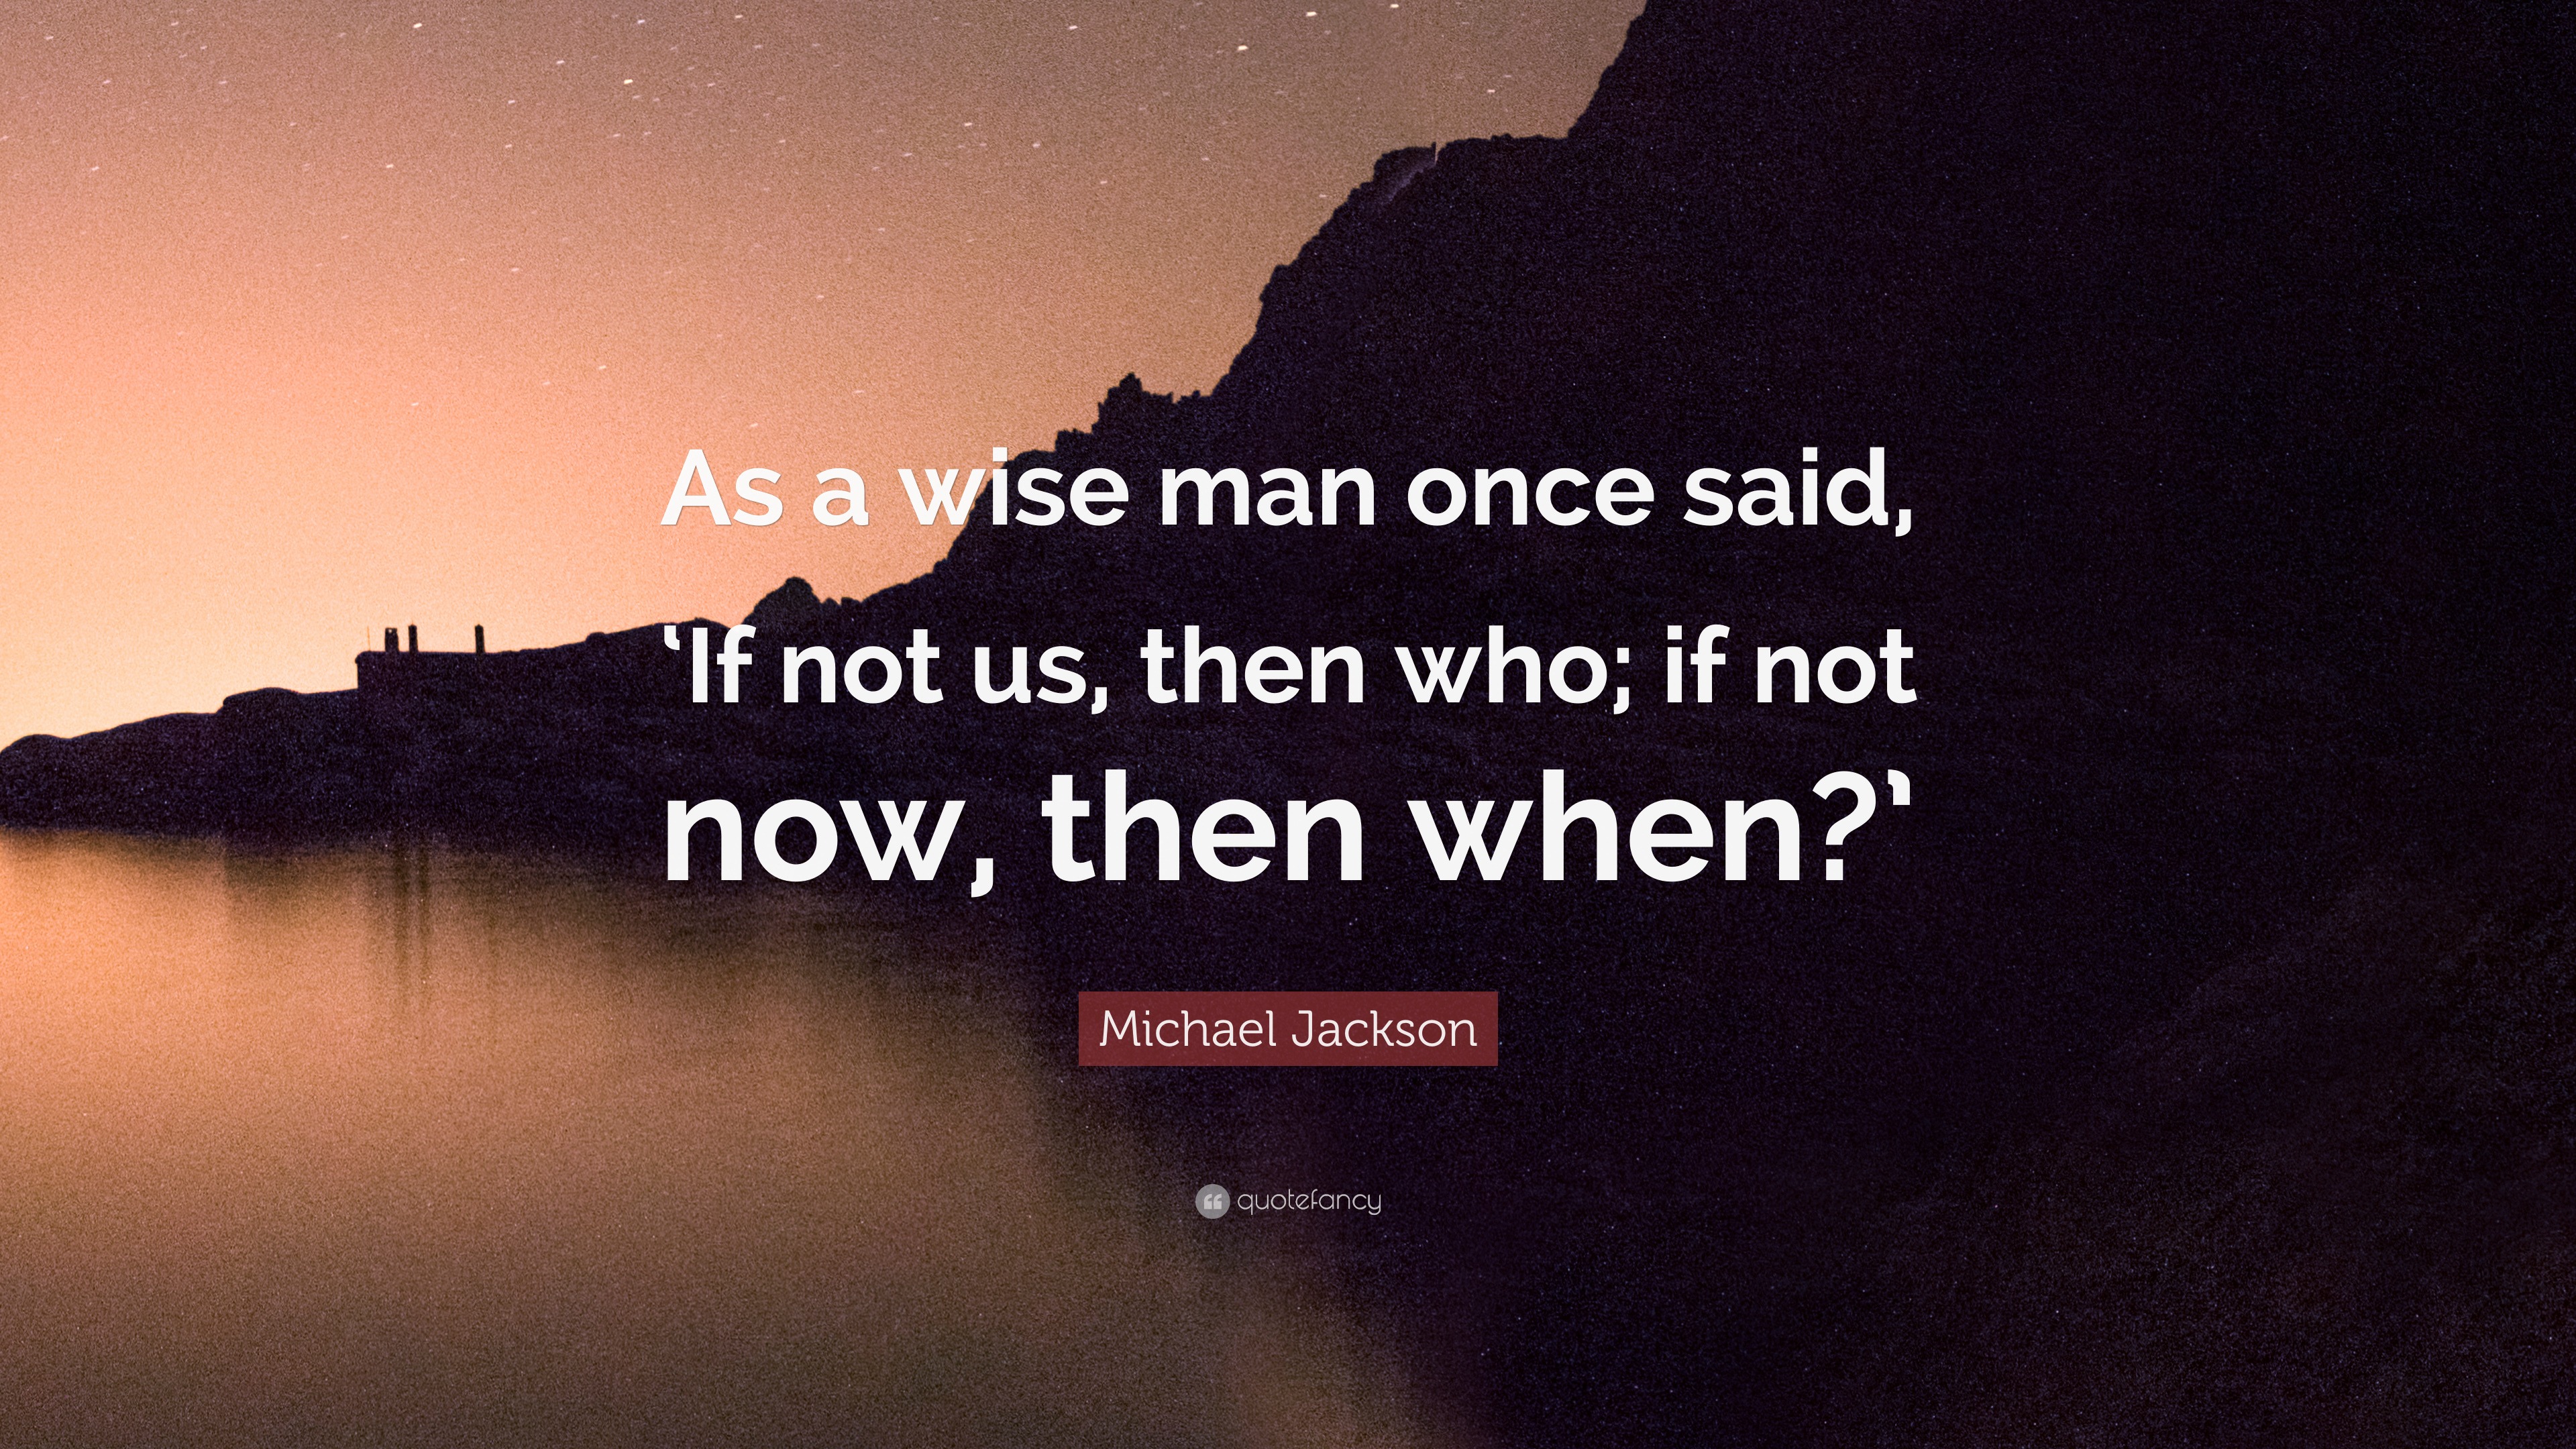 Michael Jackson Quote “As a wise man once said If not us